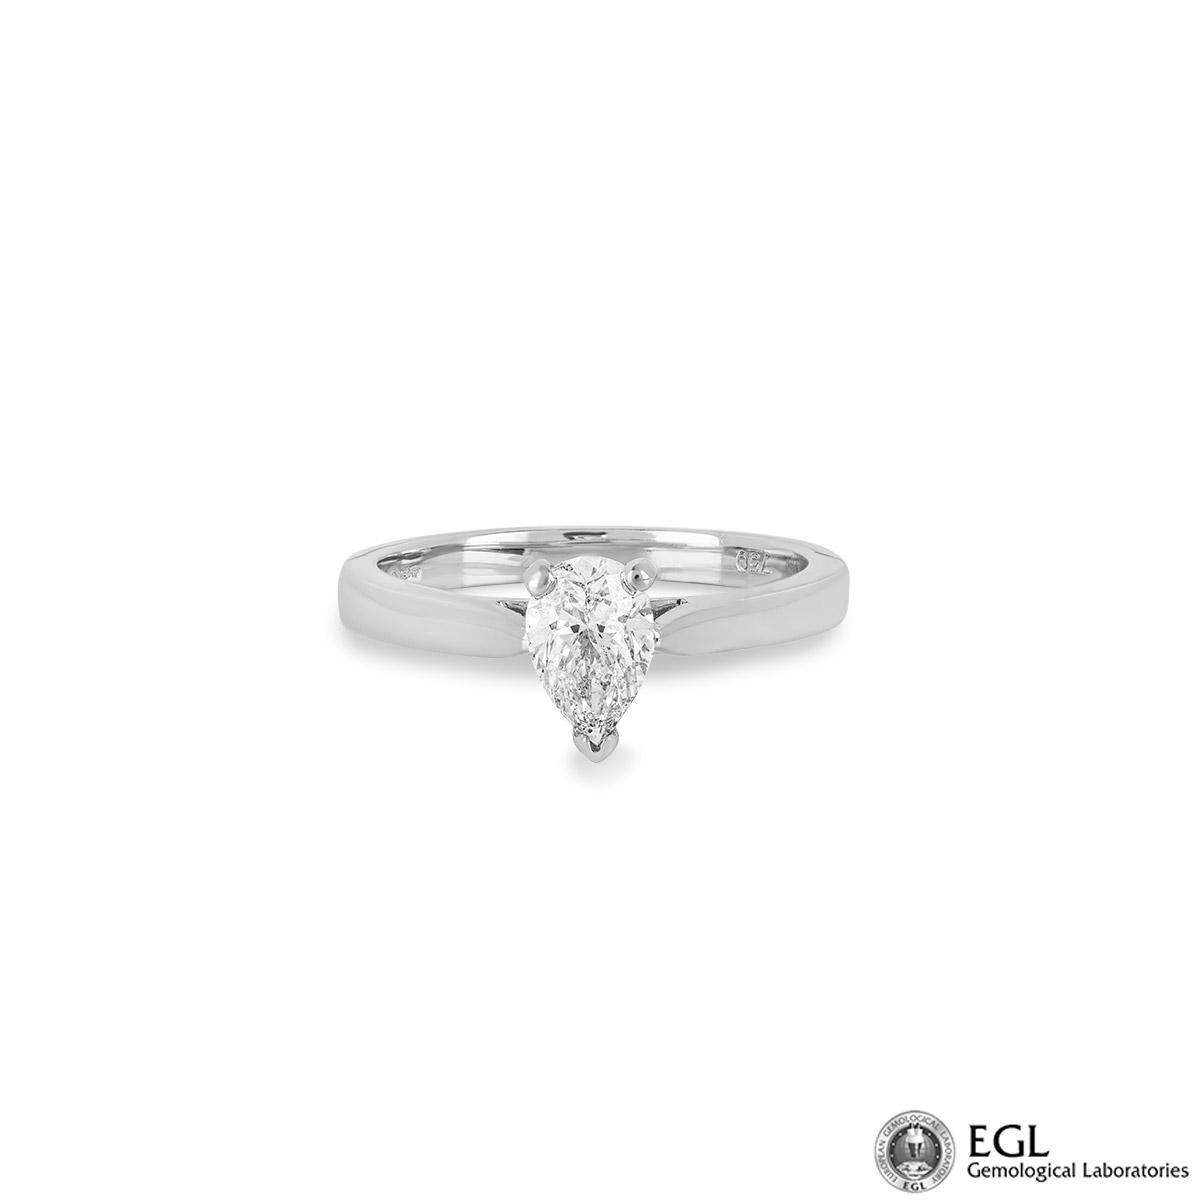 EGL Certified White Gold Pear Cut Diamond Ring 0.75ct H/SI2 In Excellent Condition For Sale In London, GB